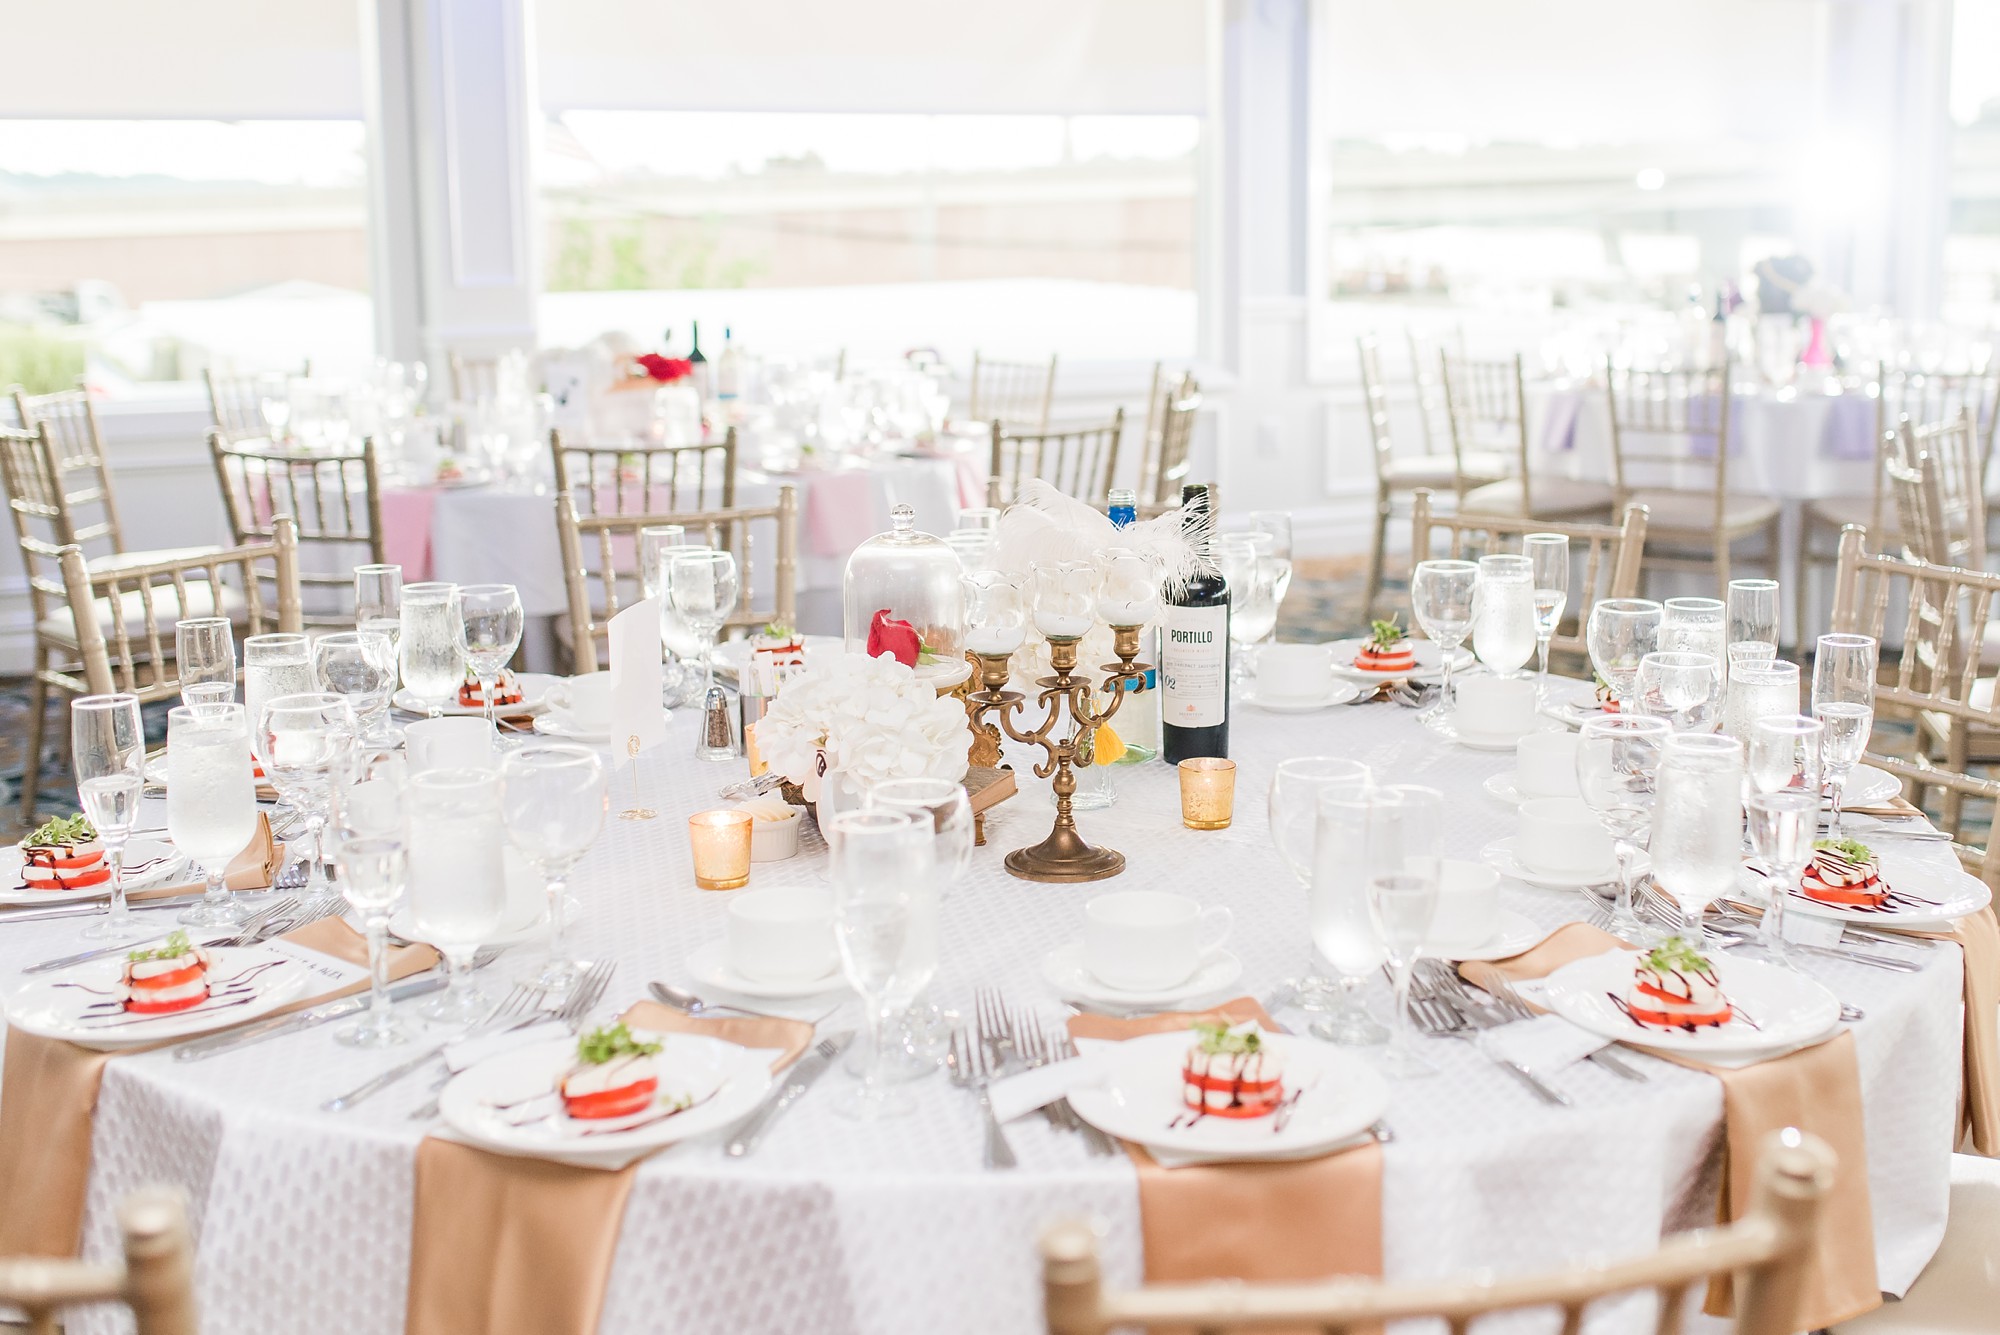 Disney Wedding at Crystal Point Yacht Club in New Jersey